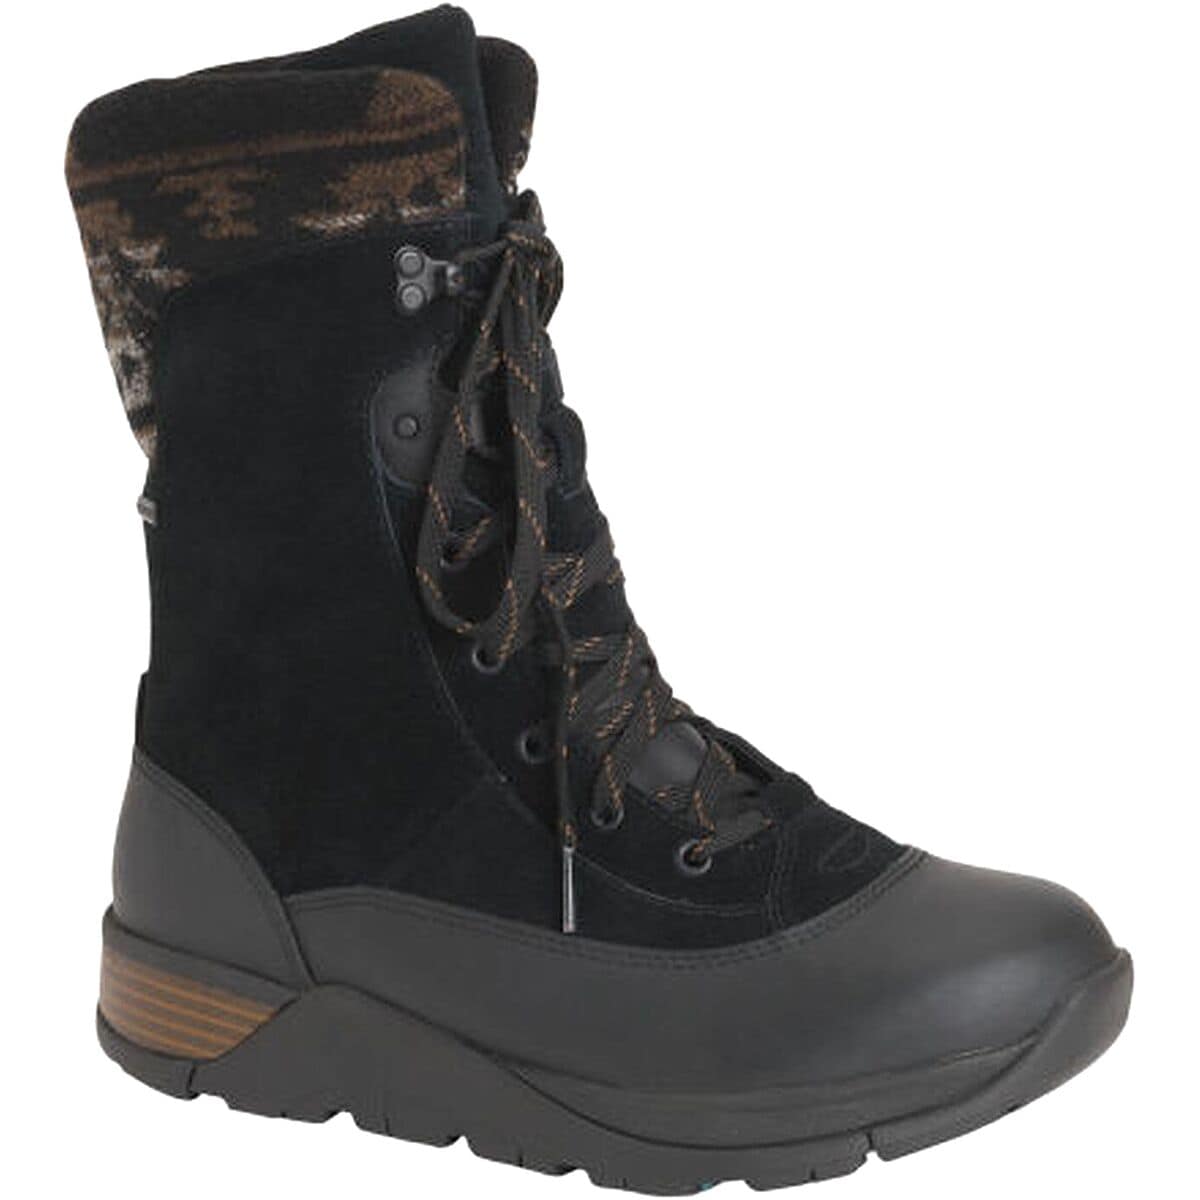 Apres Lace v2 Leather Boot - Women